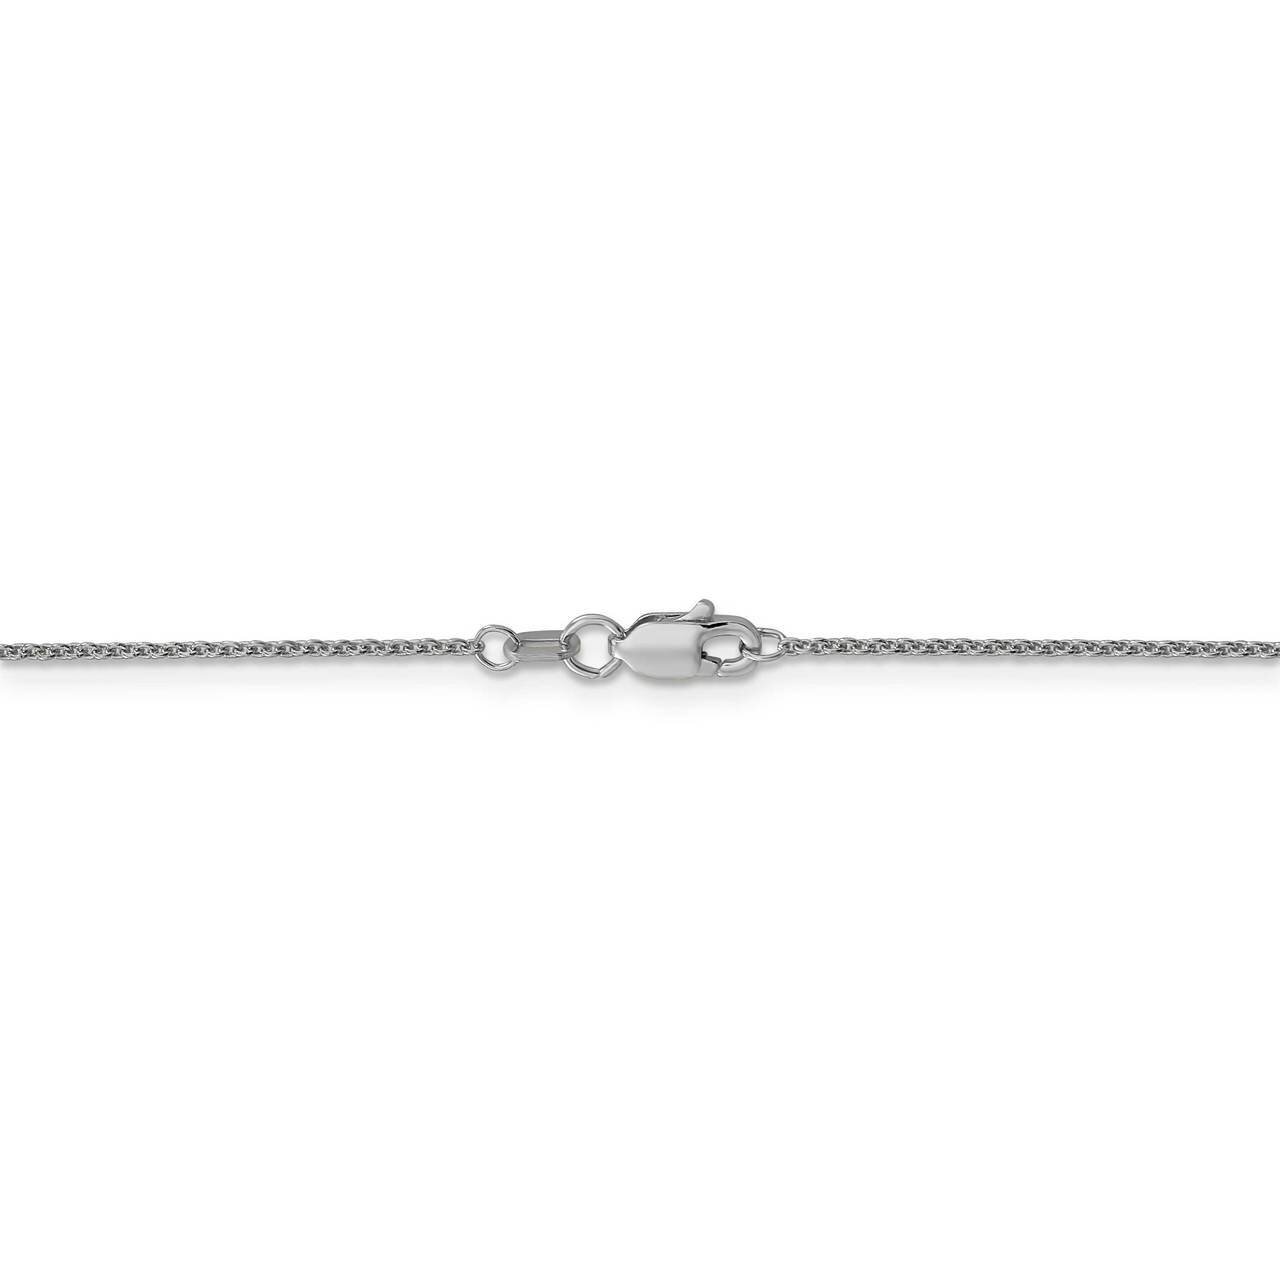 26 Inch 1mm Cable Chain 14k White Gold PEN74-26